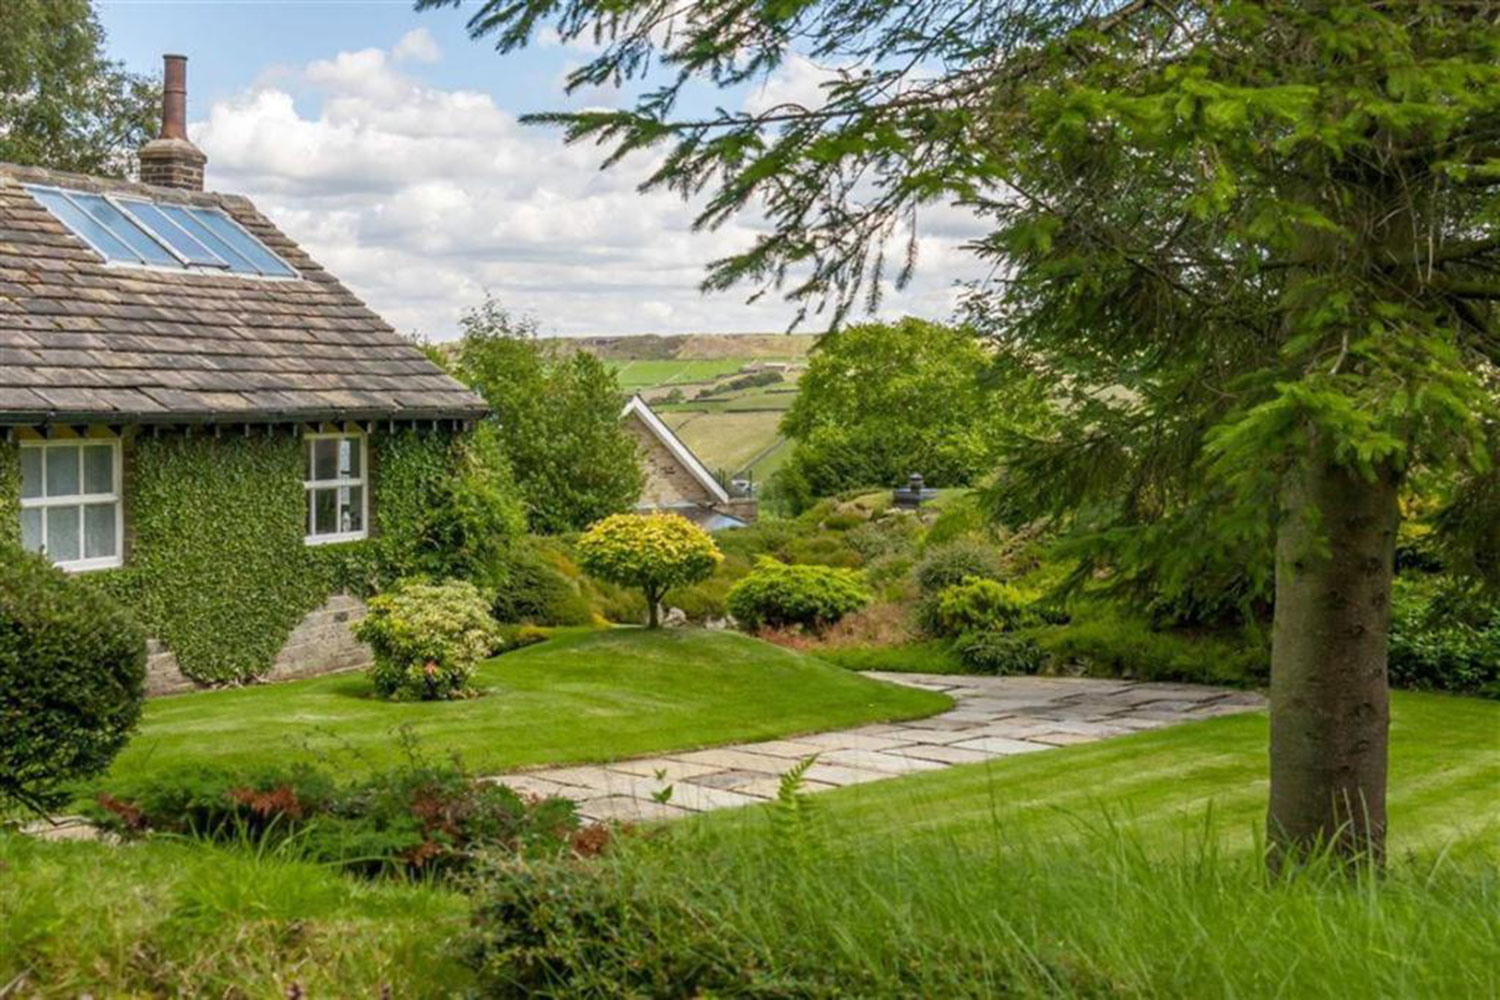 hobbit style home goes up for sale in england hobbithouse 02